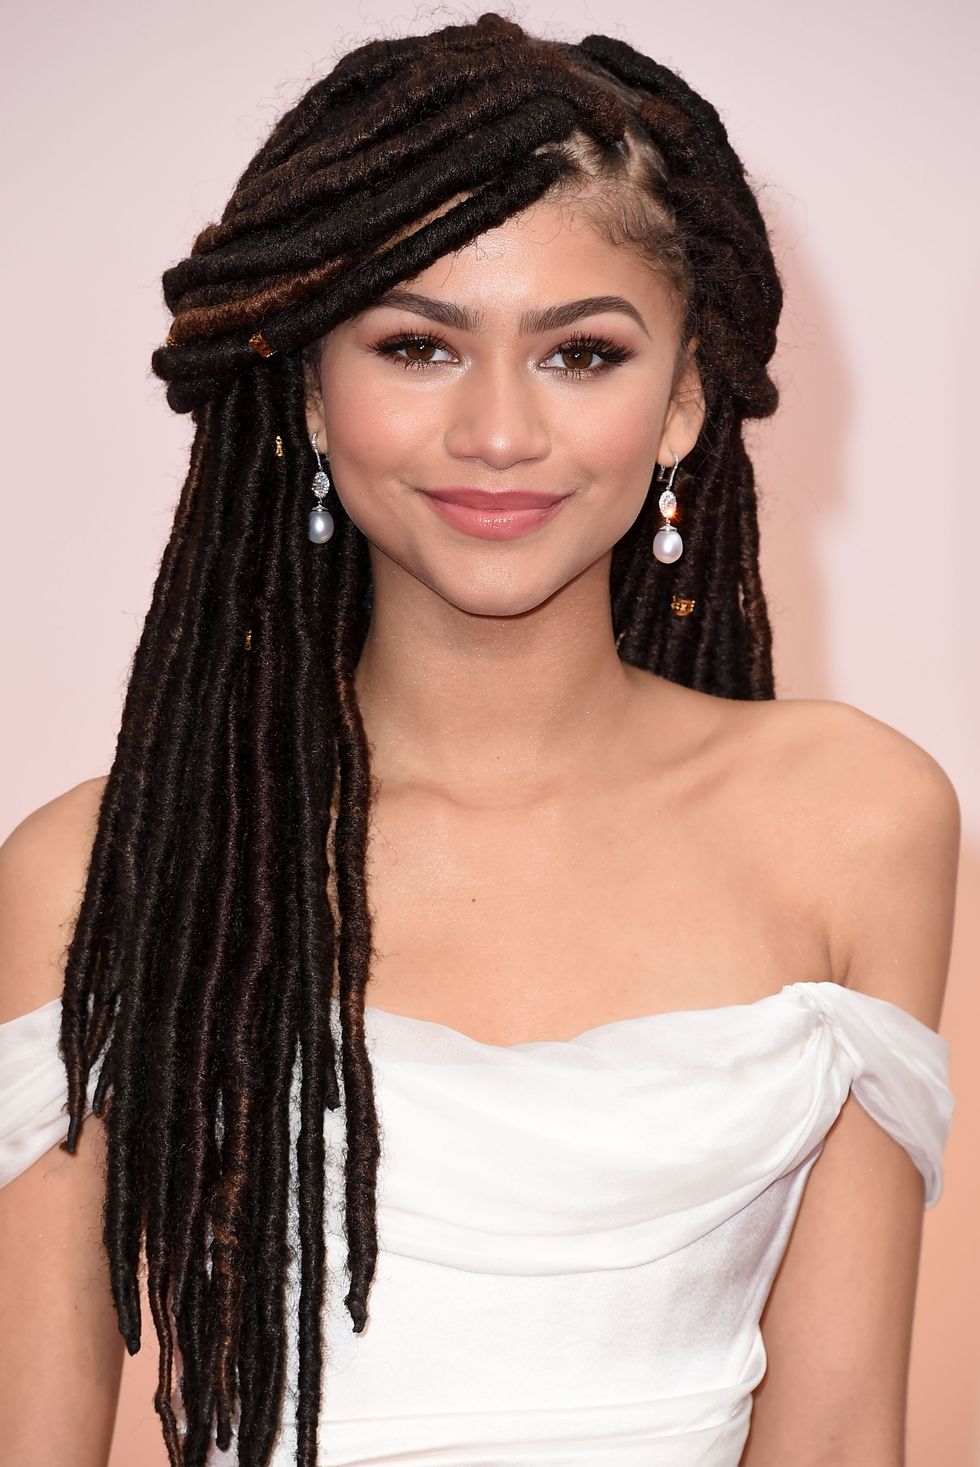 35 of Zendaya's Best Hair Looks of All Time